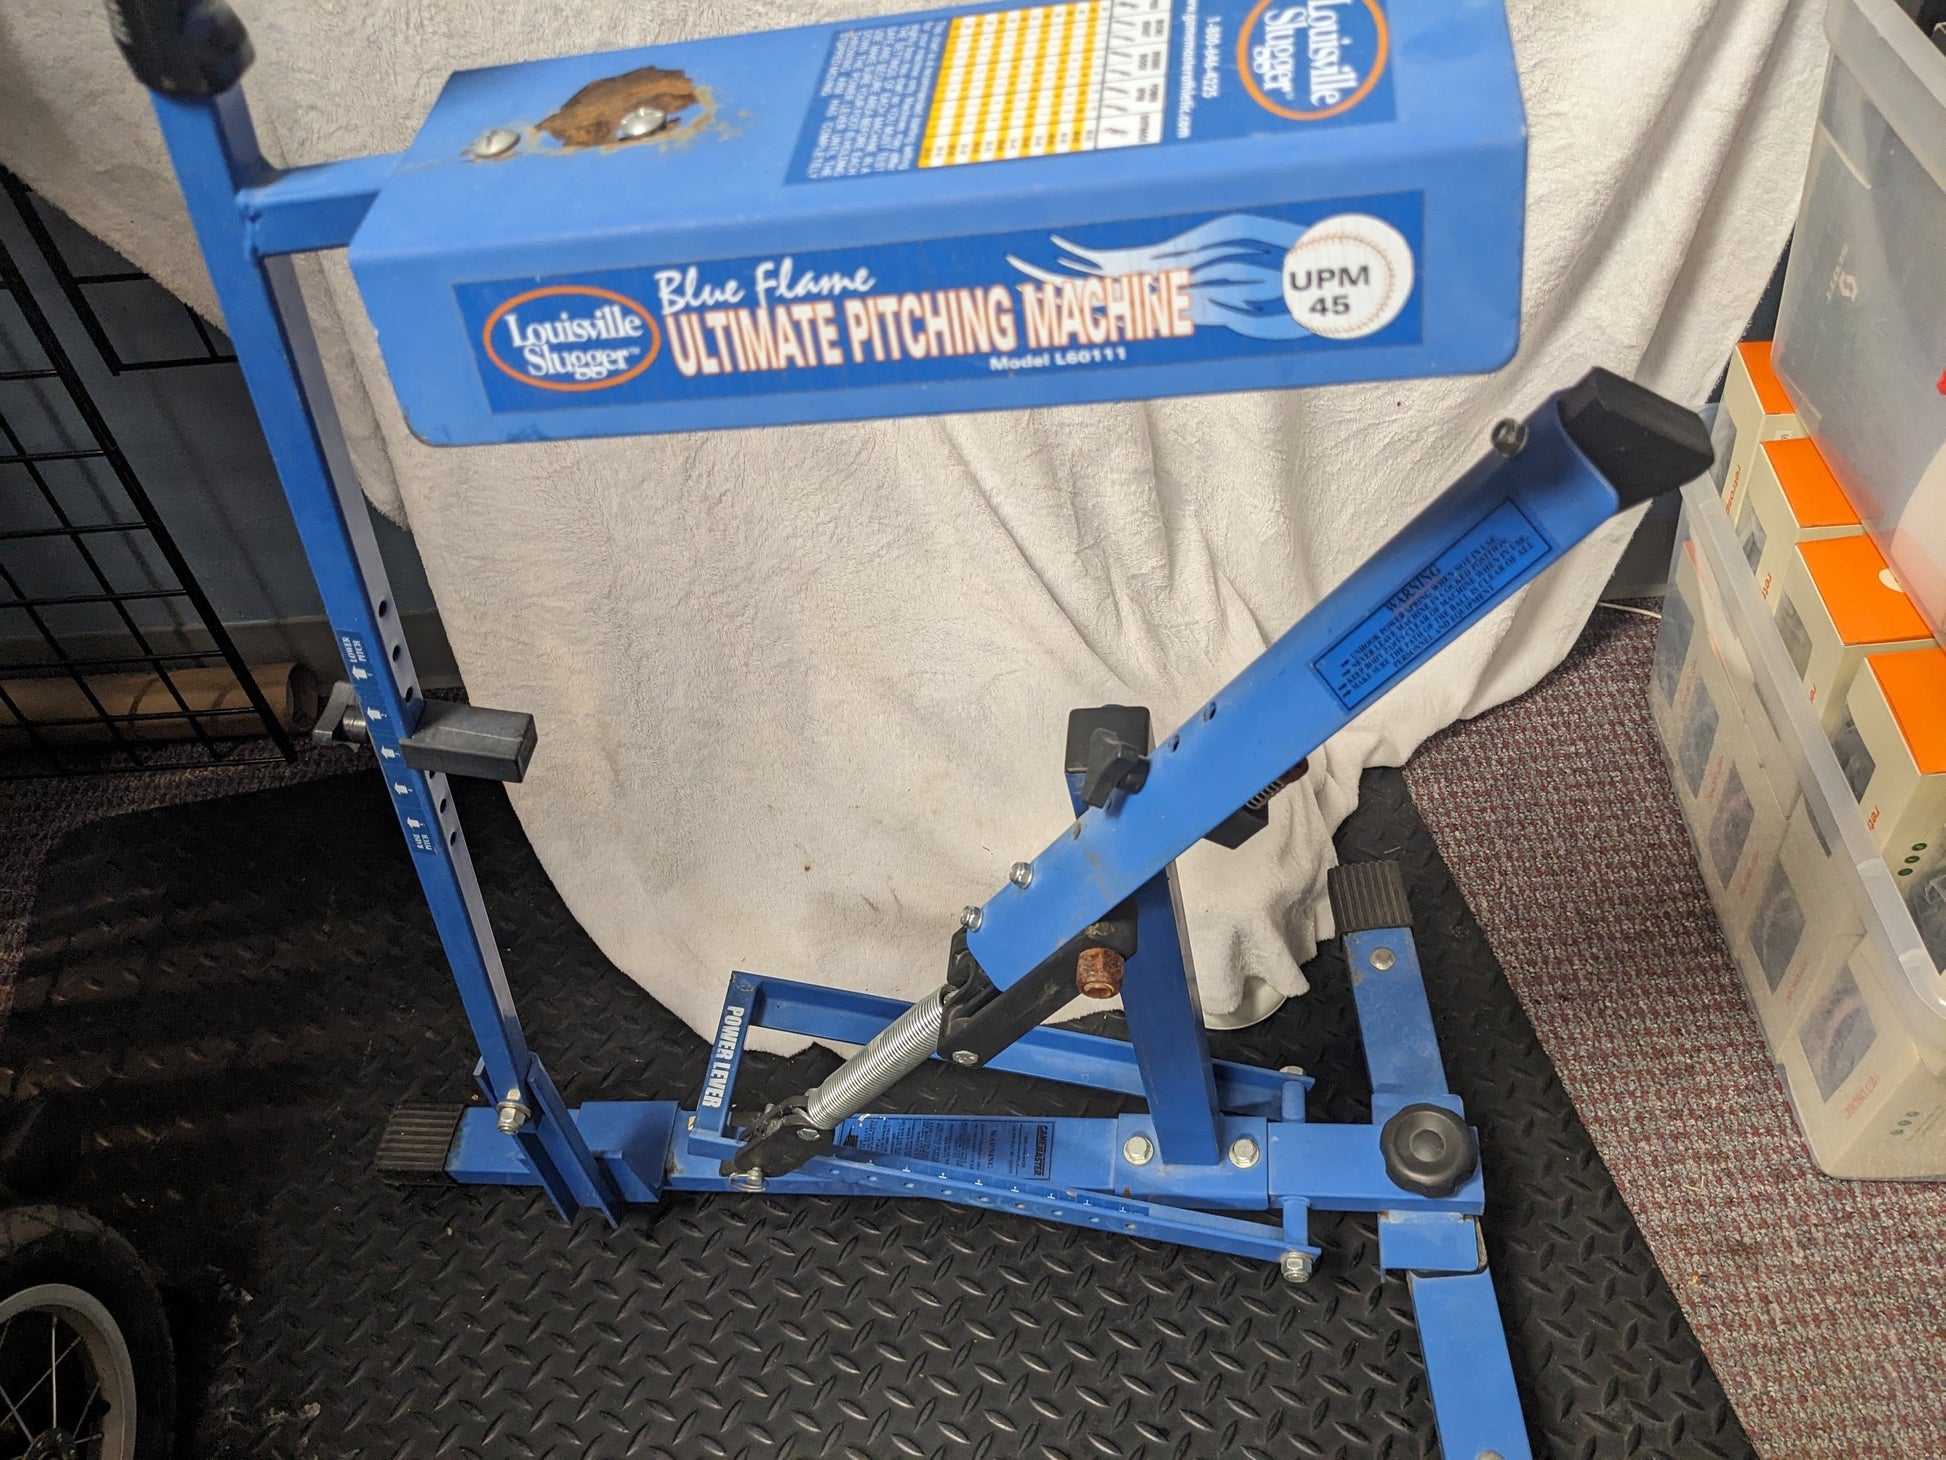 The Blue Flame Ultimate Pitching Machine 